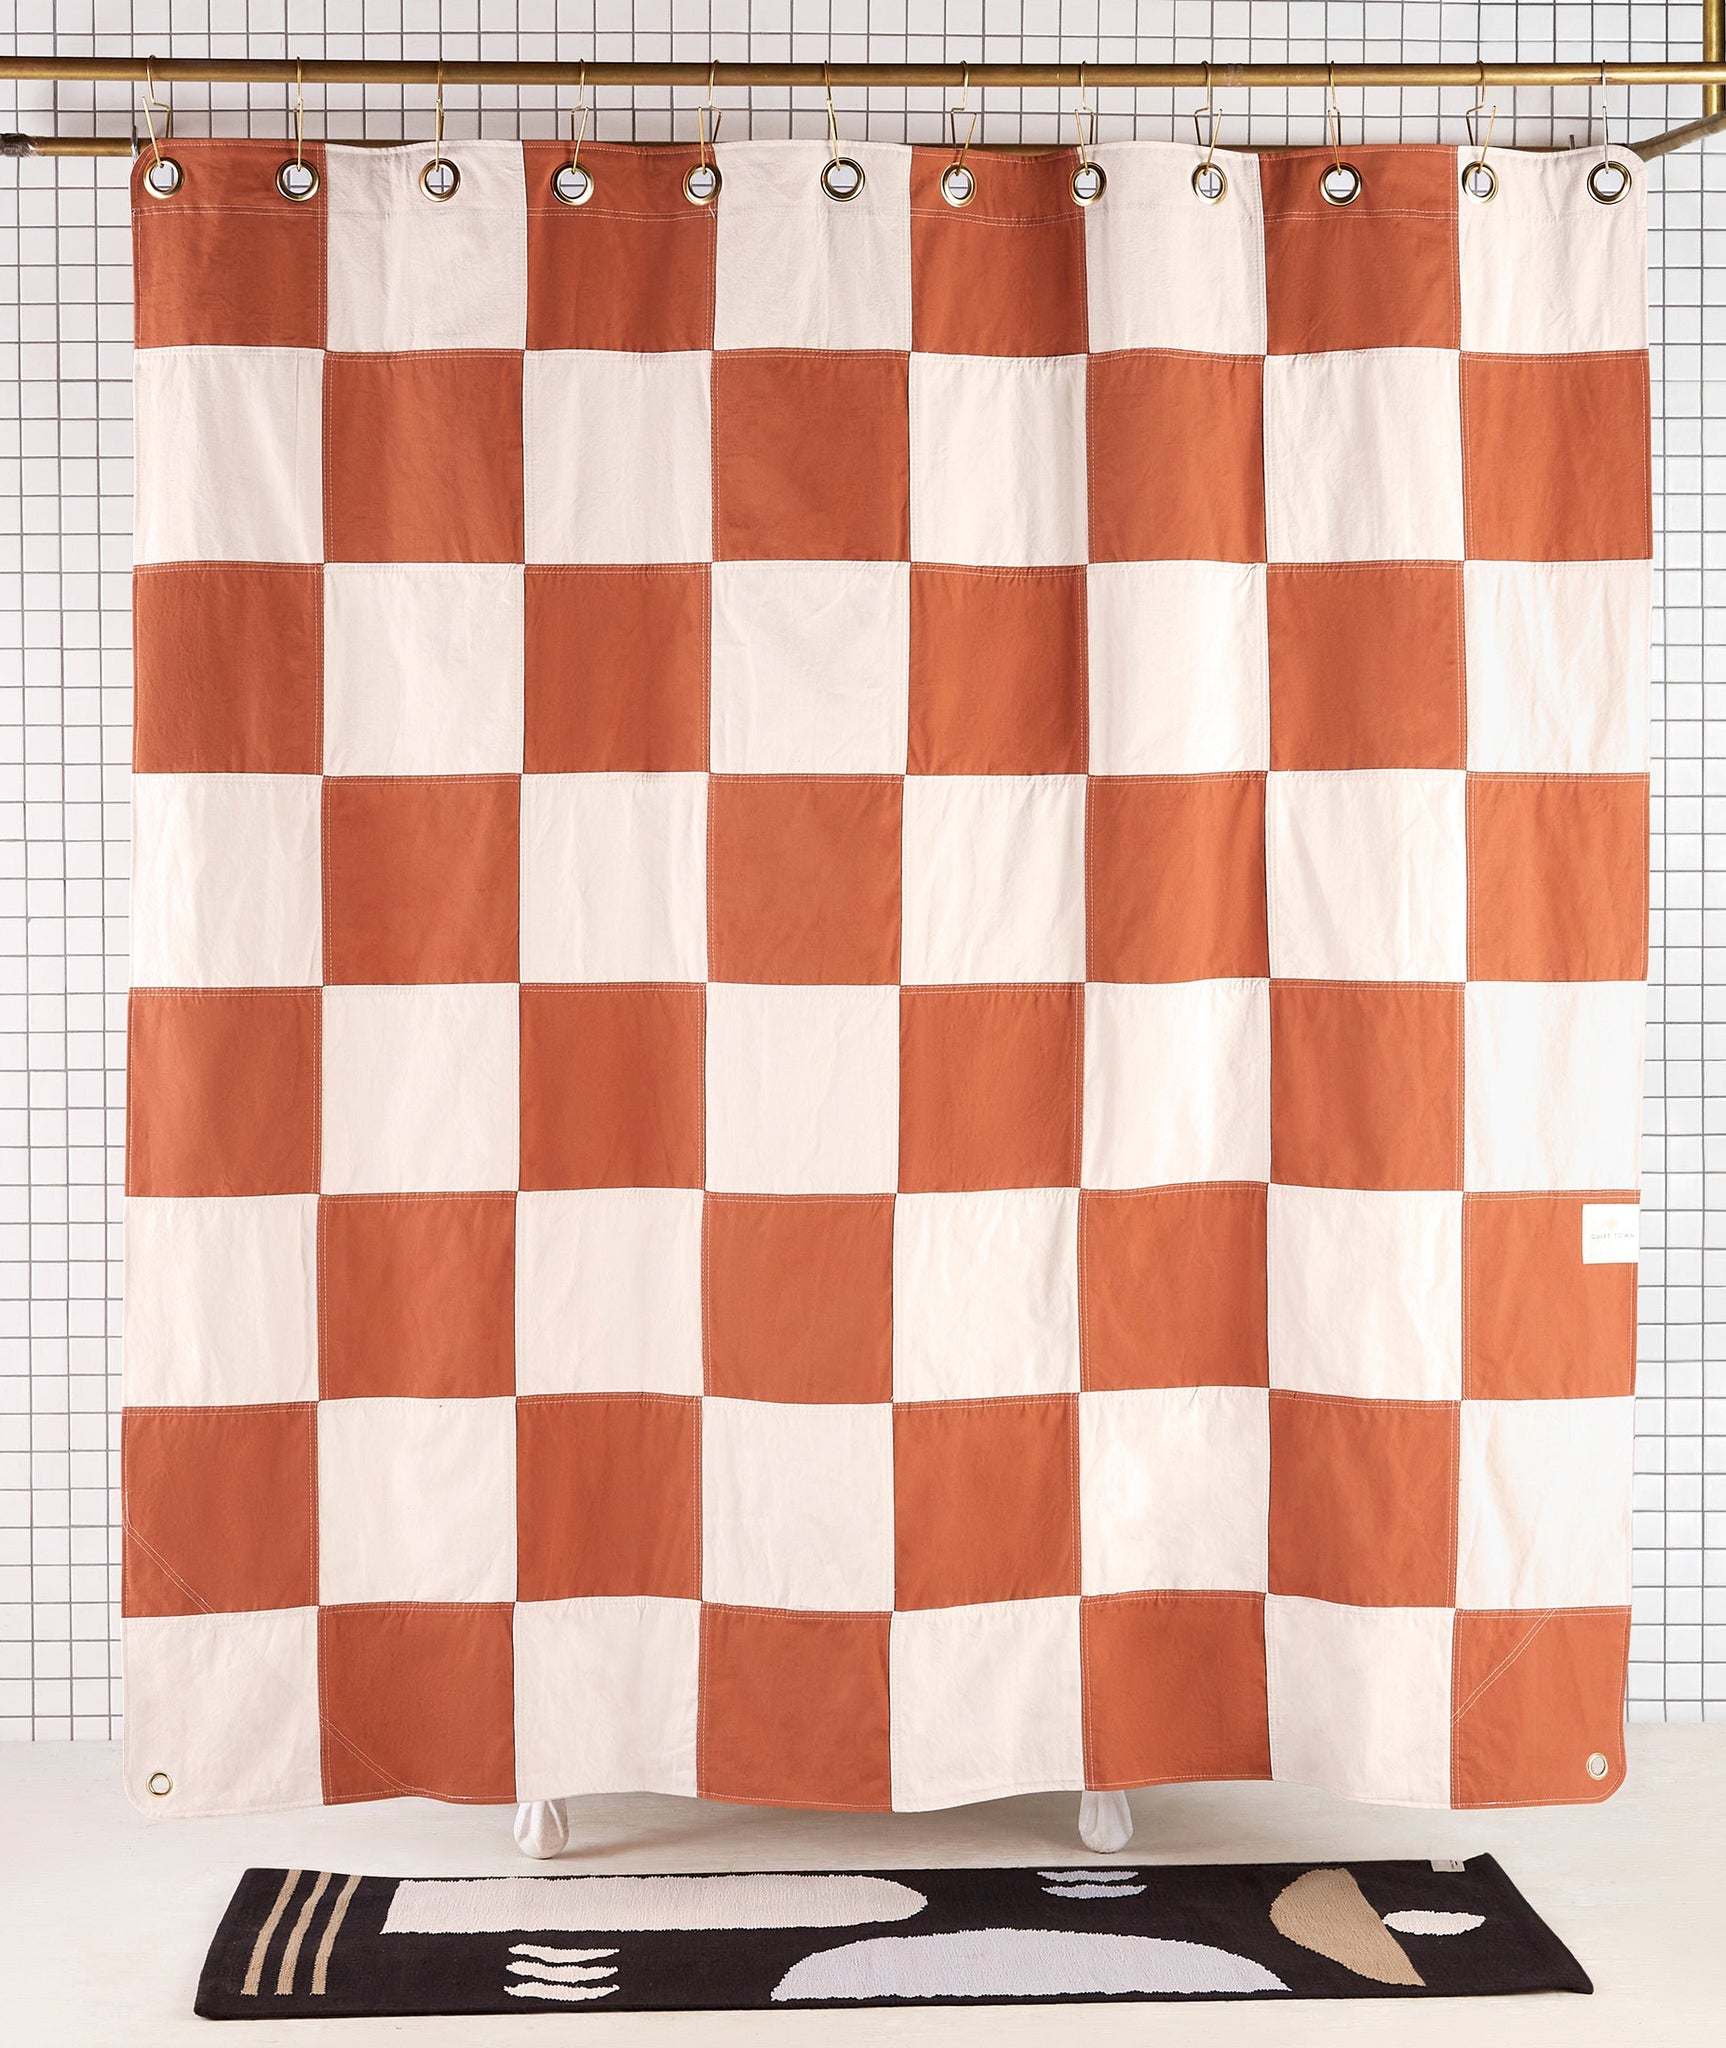 Re:Canvas Checker Shower Curtain - More Options